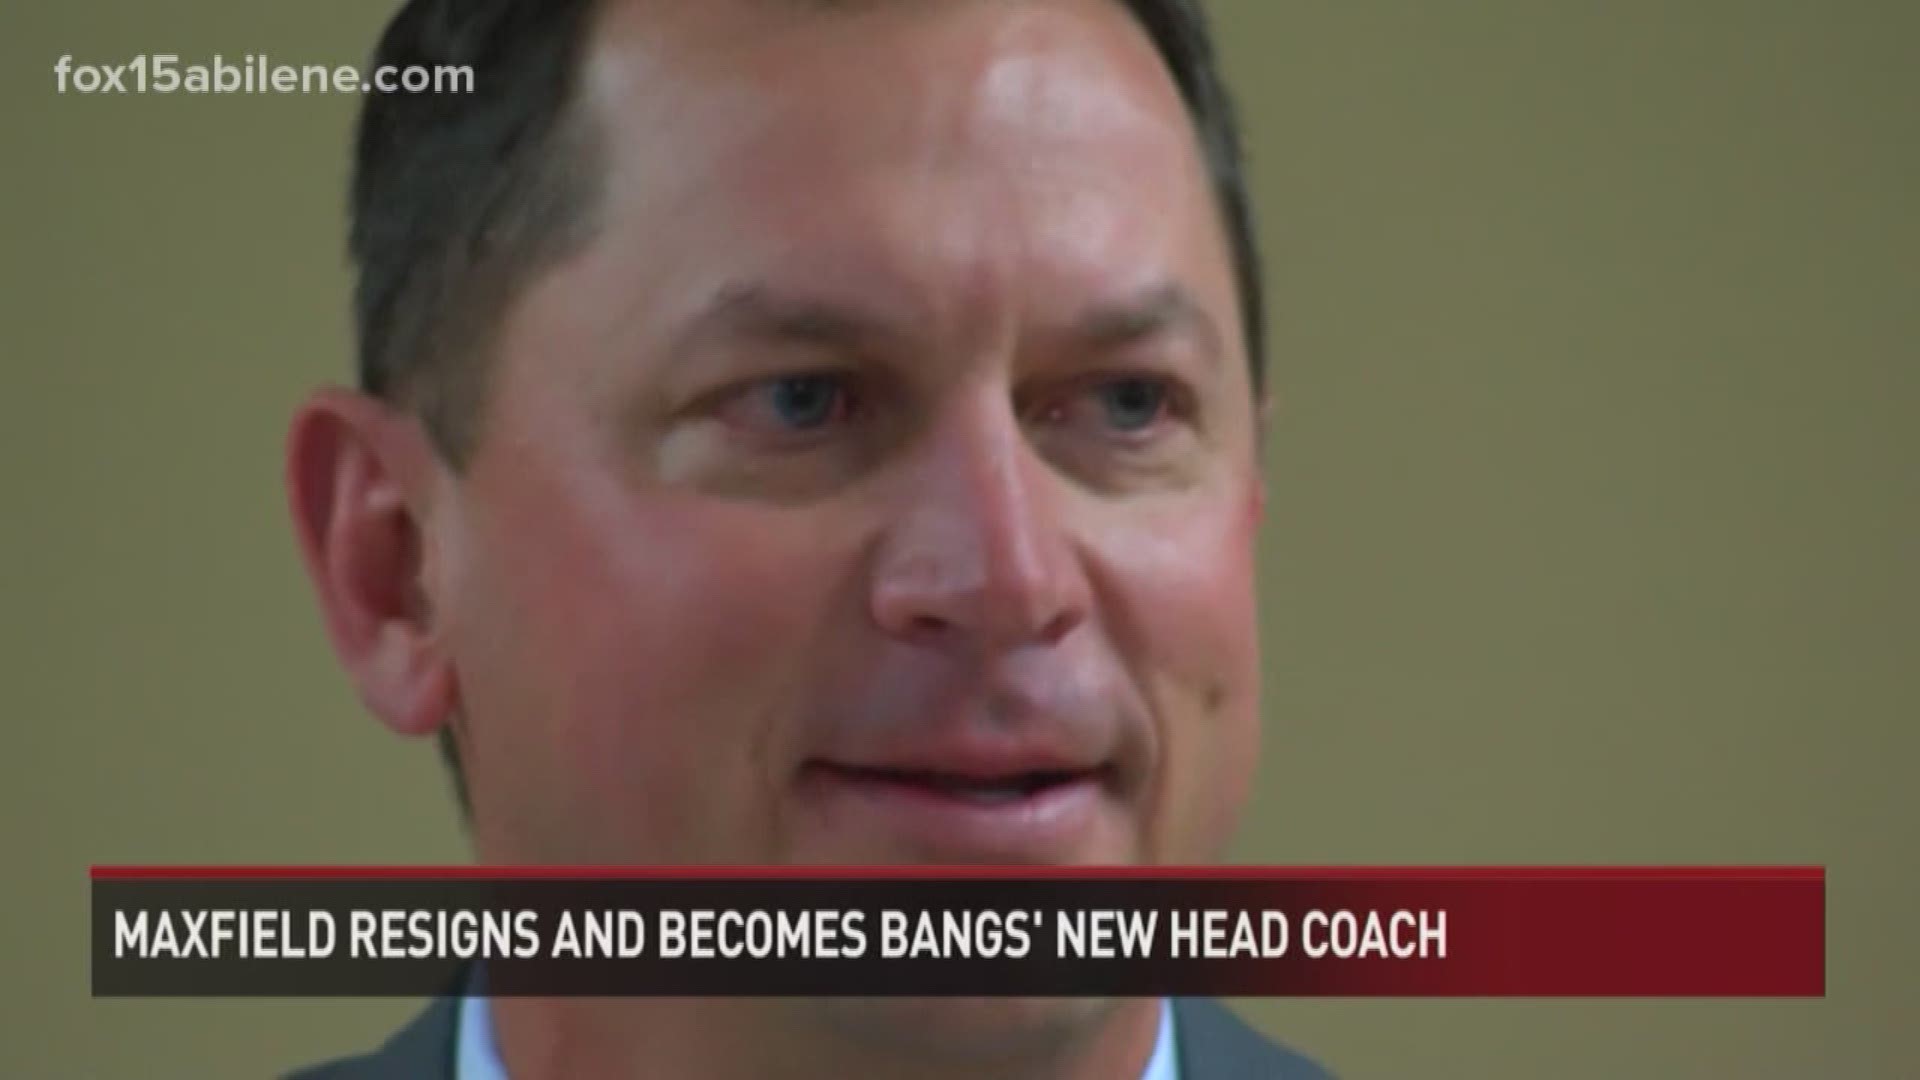 After resigning from Brownwood, Kyle Maxfield accepted the head coach/athletic director position at Bangs.